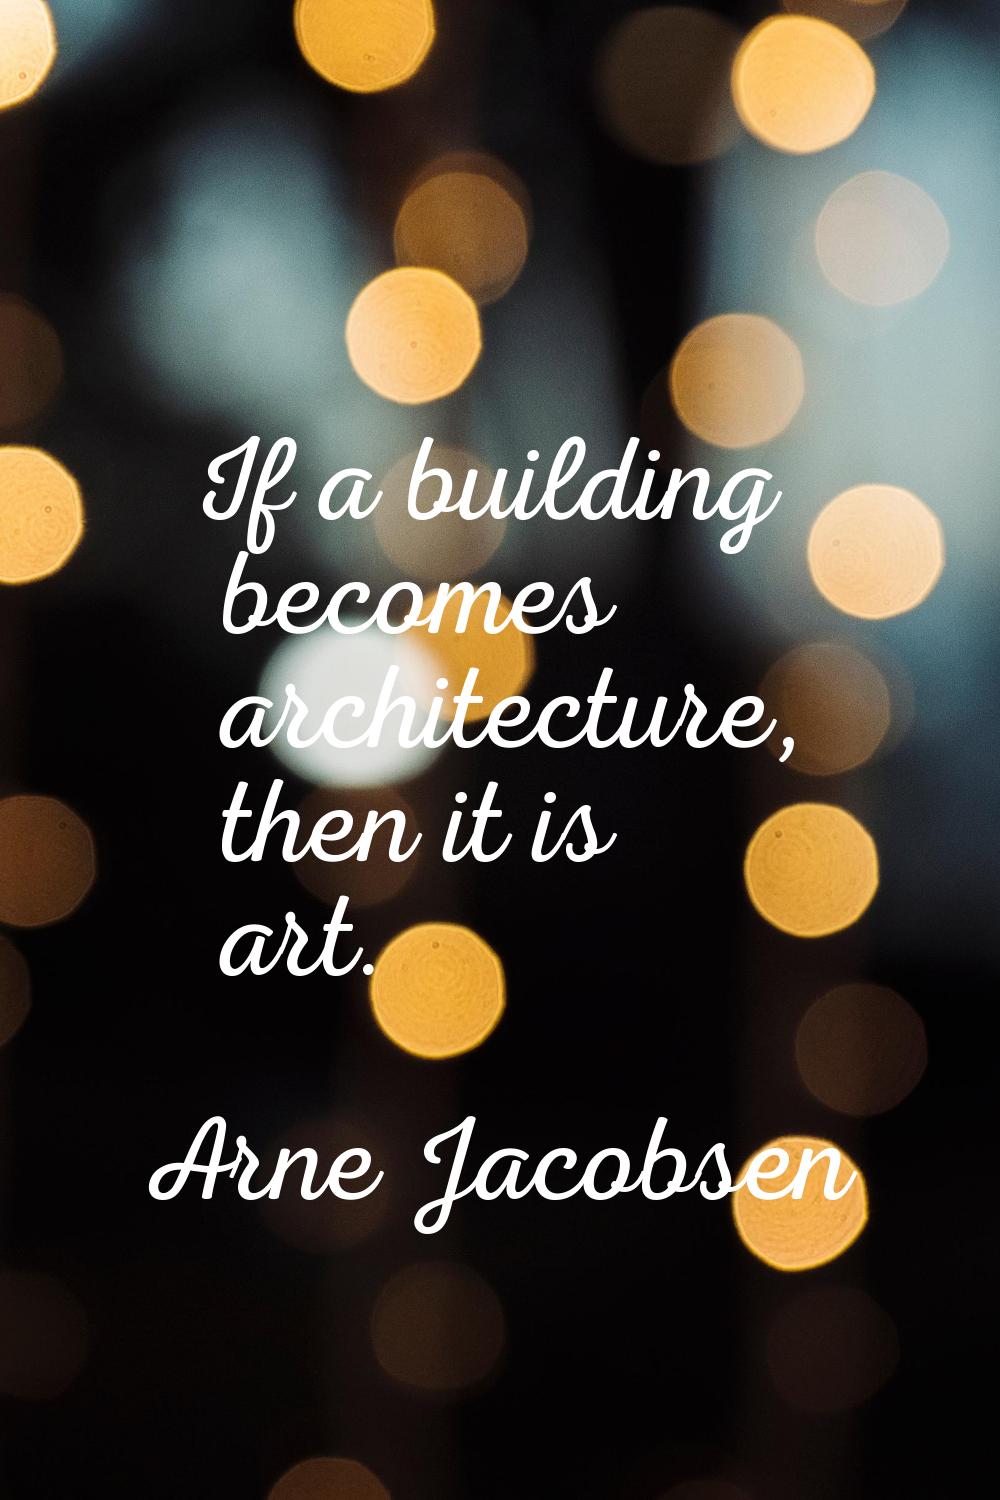 If a building becomes architecture, then it is art.